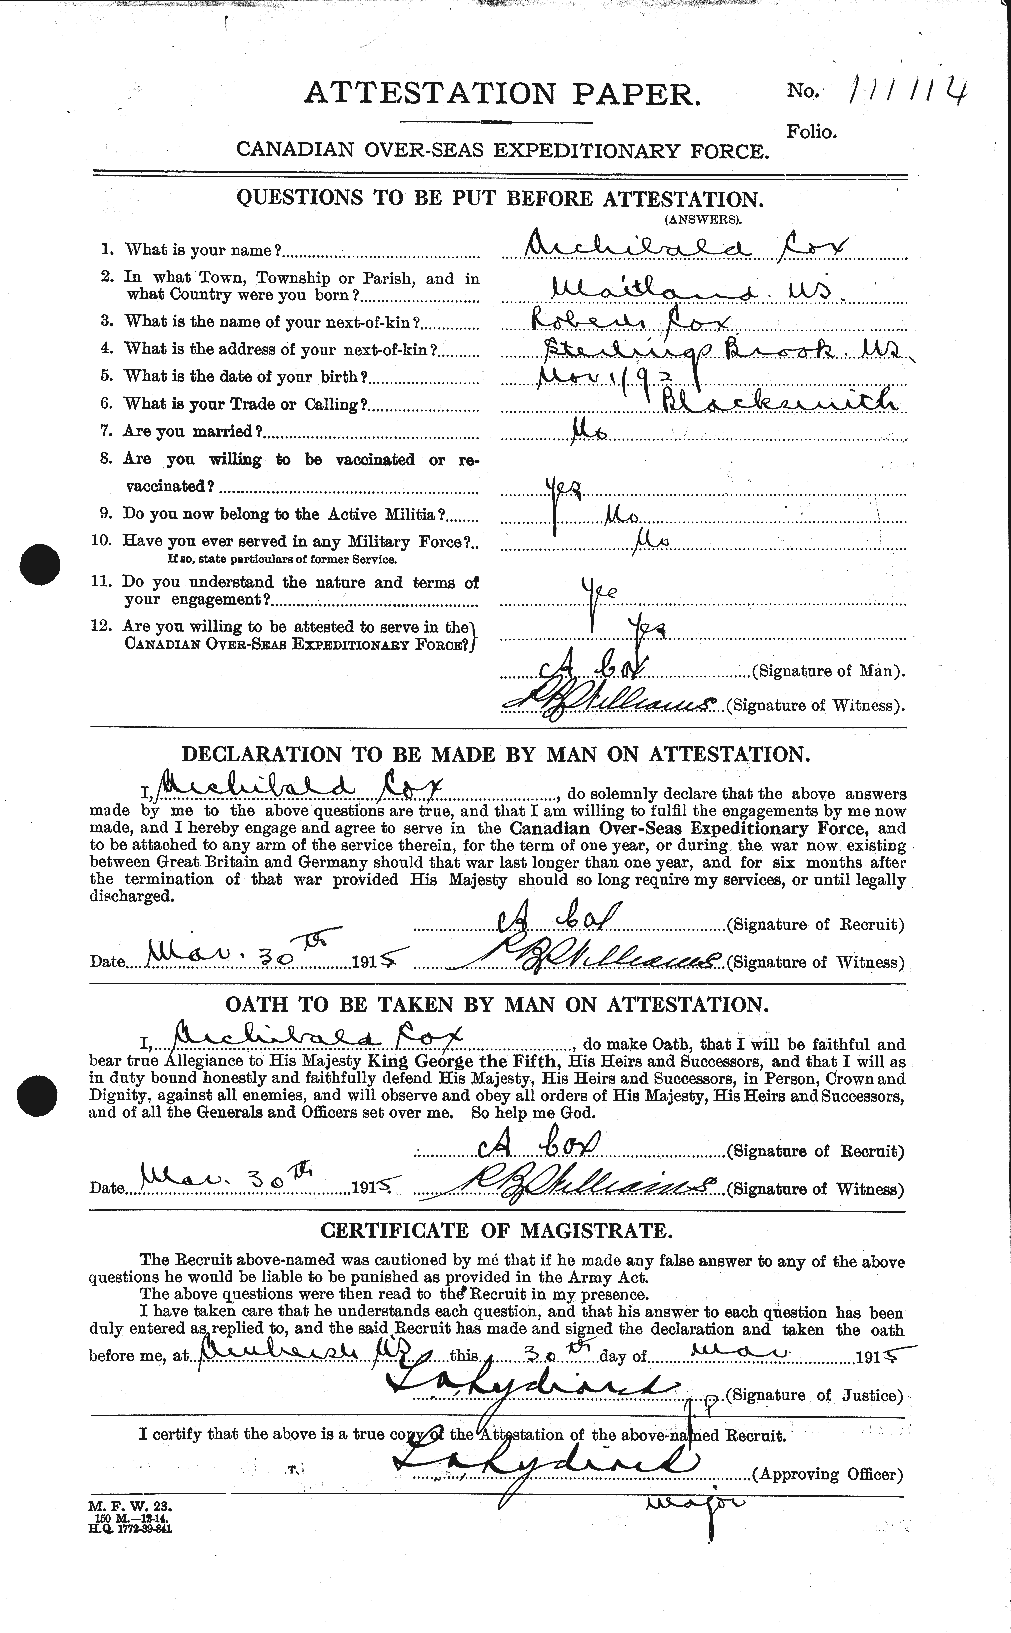 Personnel Records of the First World War - CEF 061452a